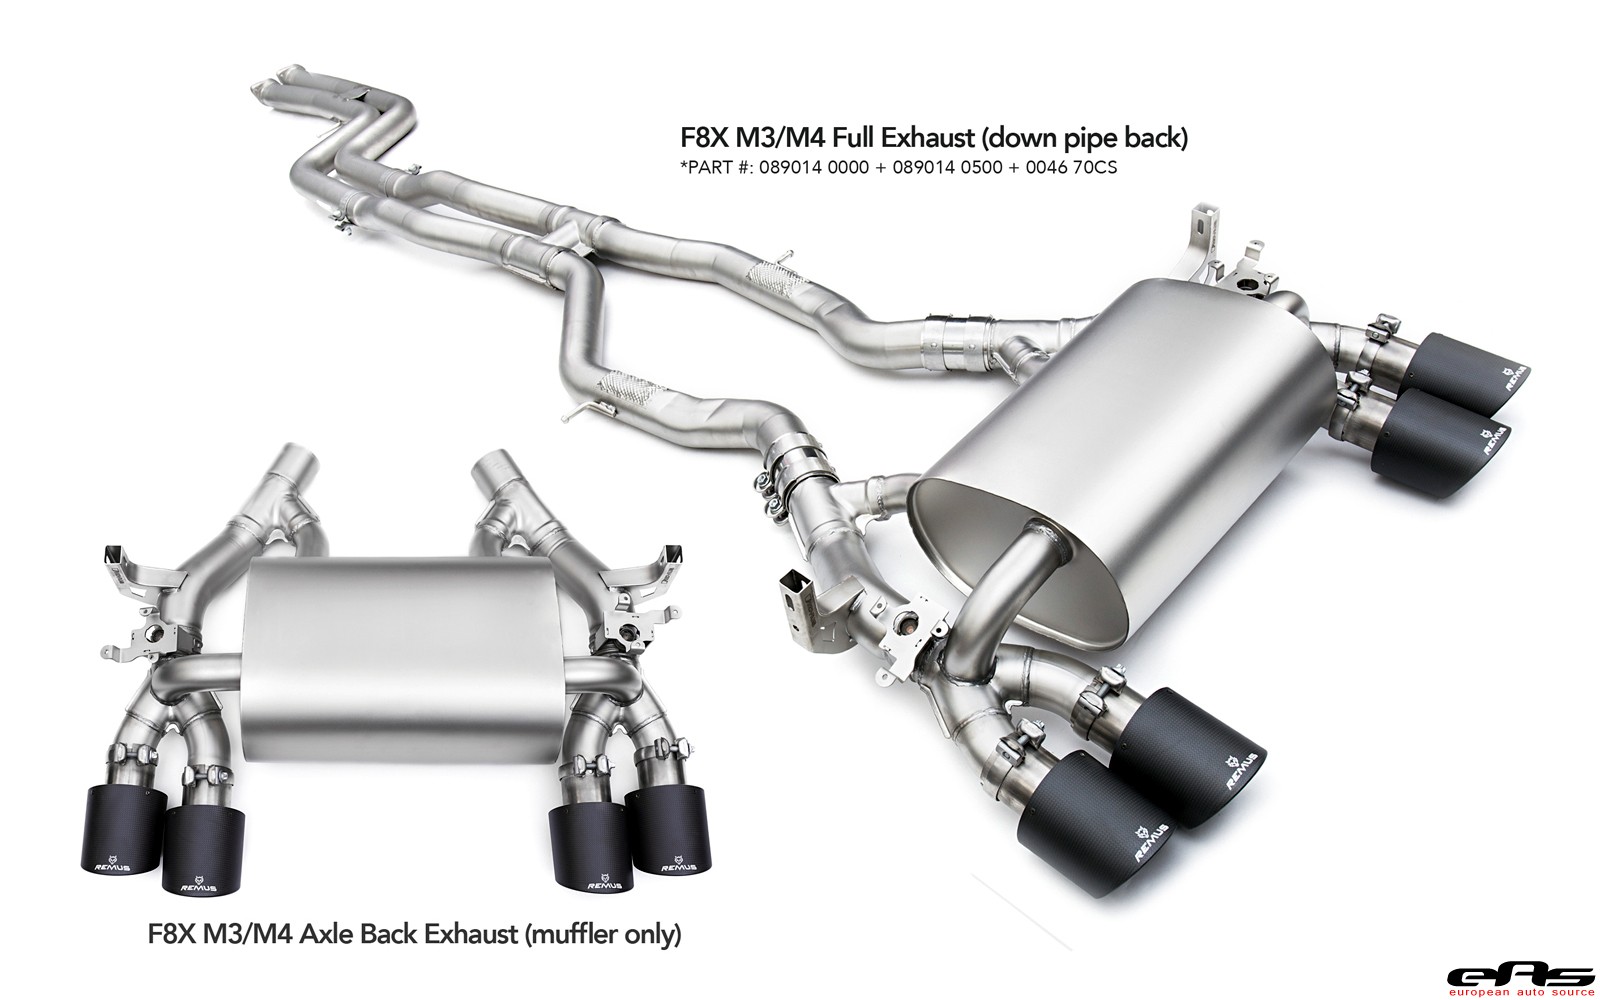 Bmw remus exhaust review #2